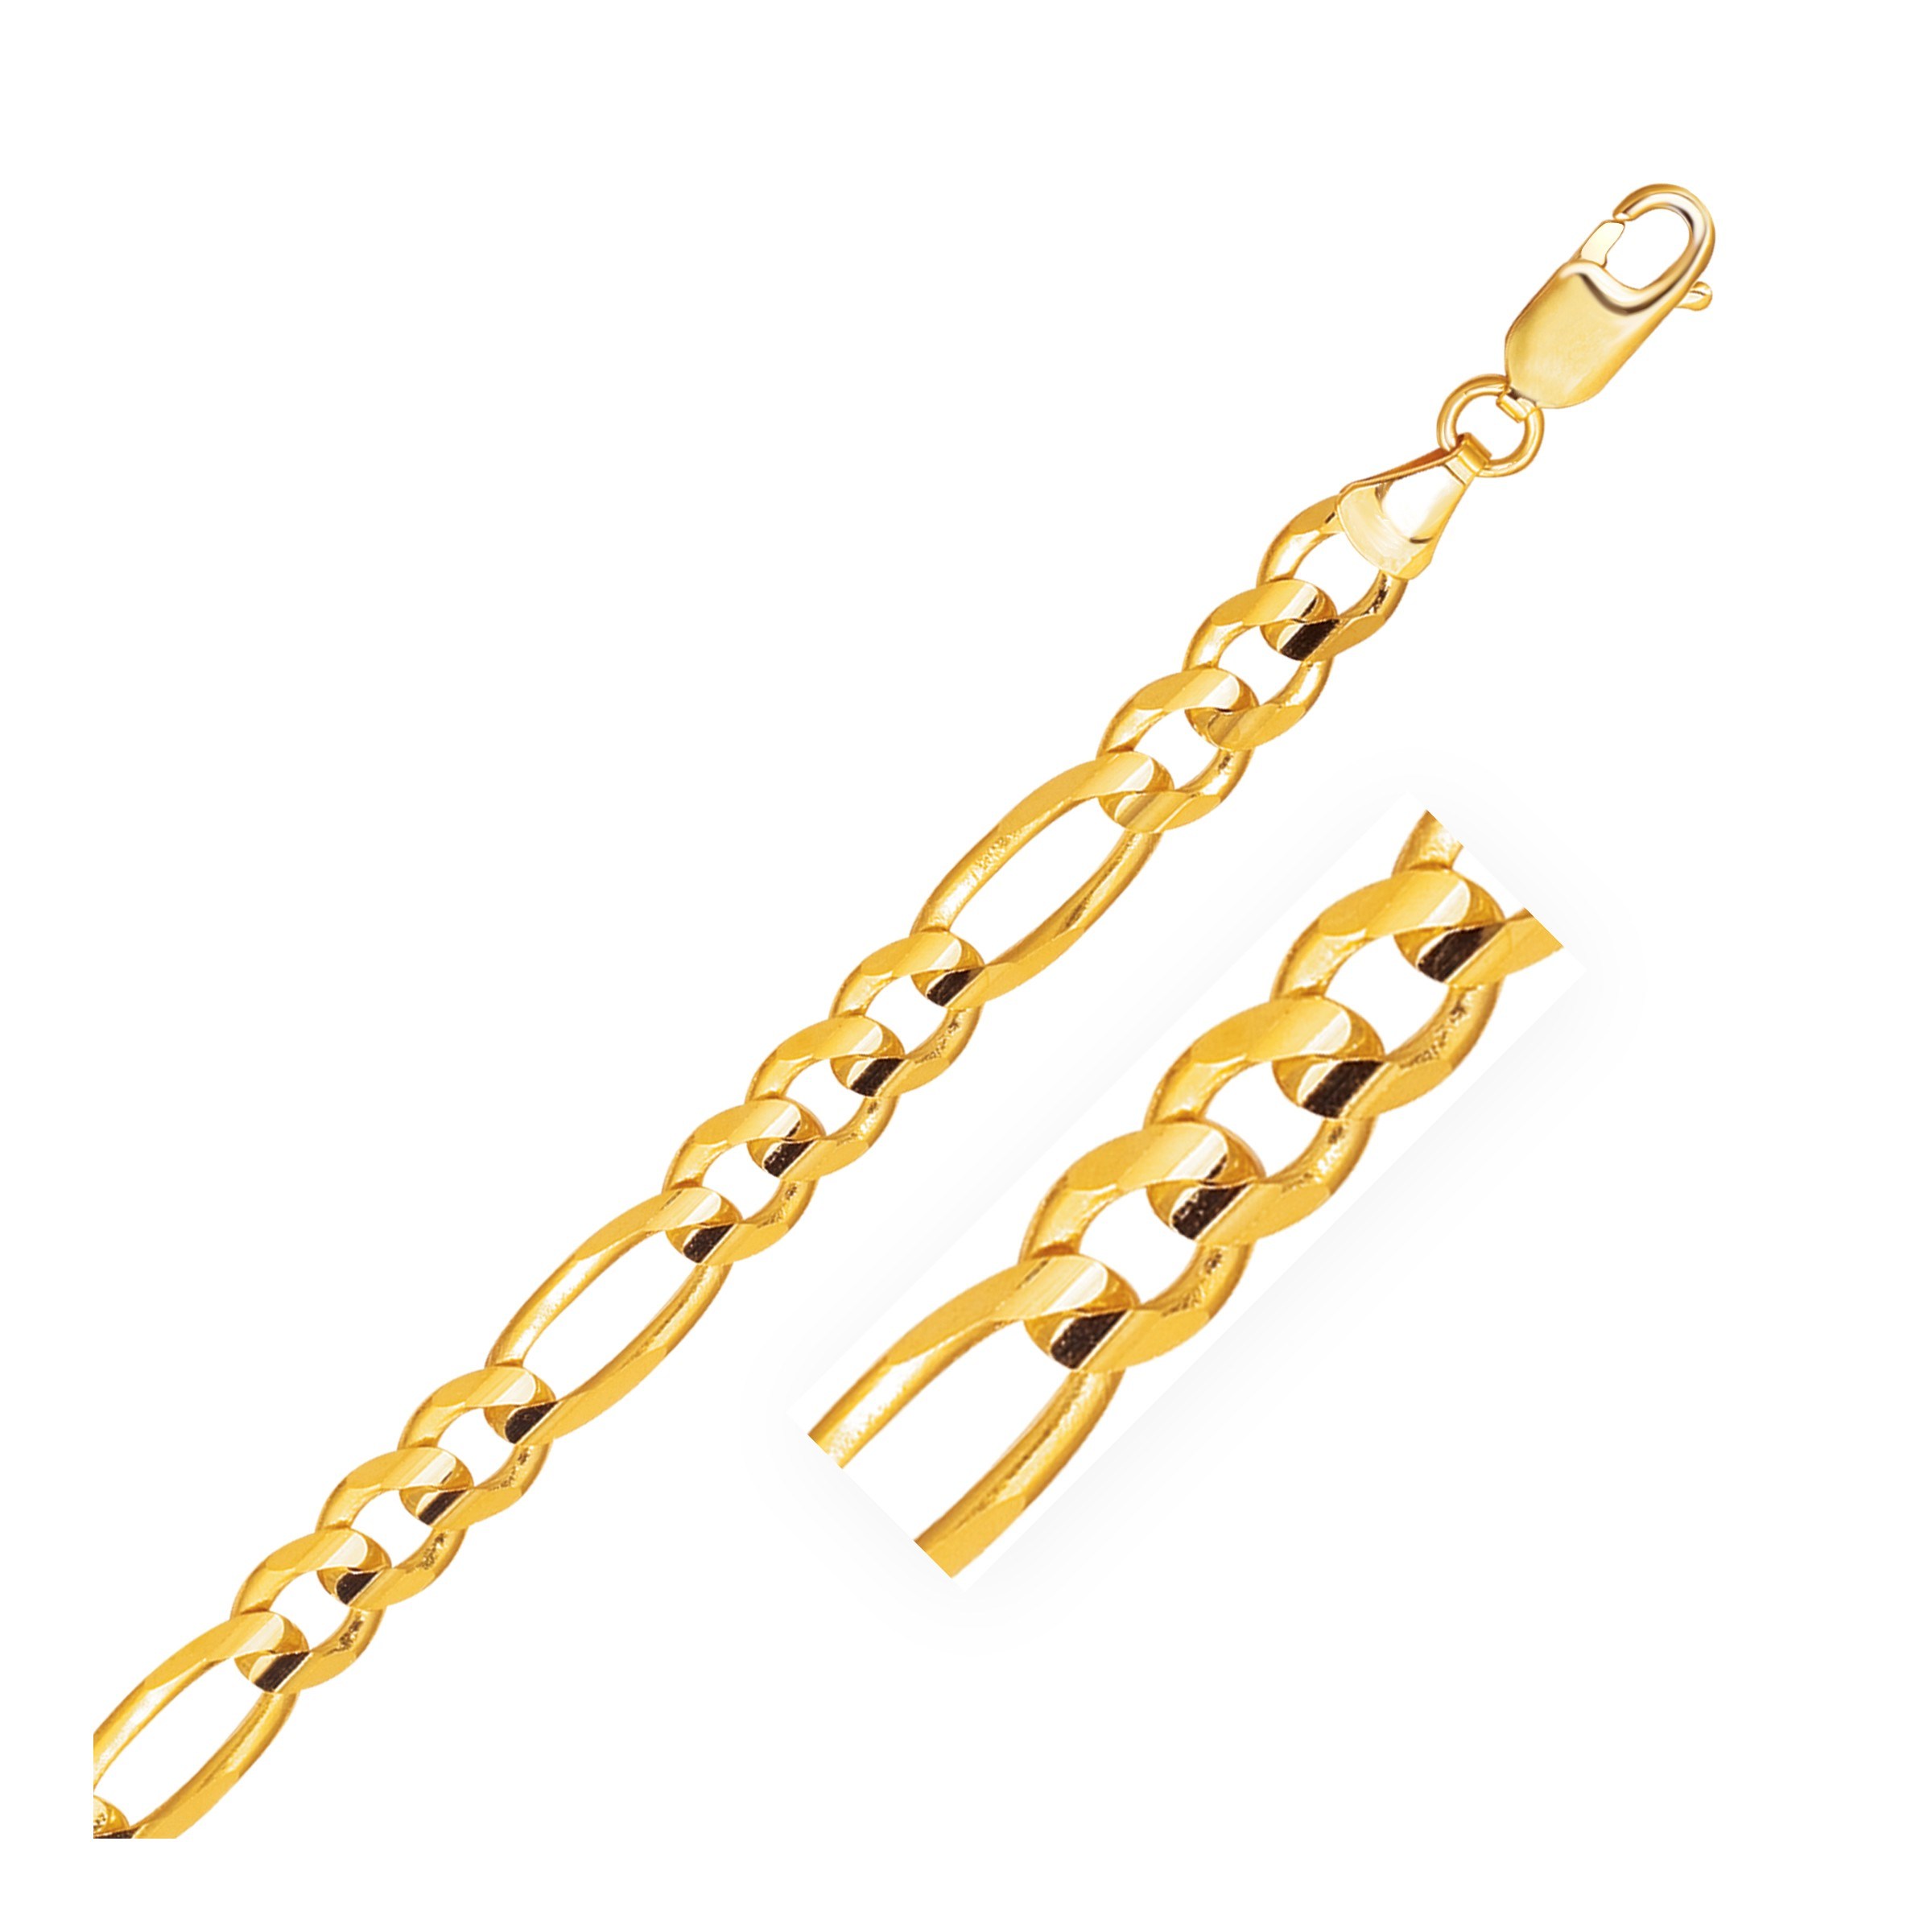 7.0mm 14k Yellow Gold Solid Figaro Chain